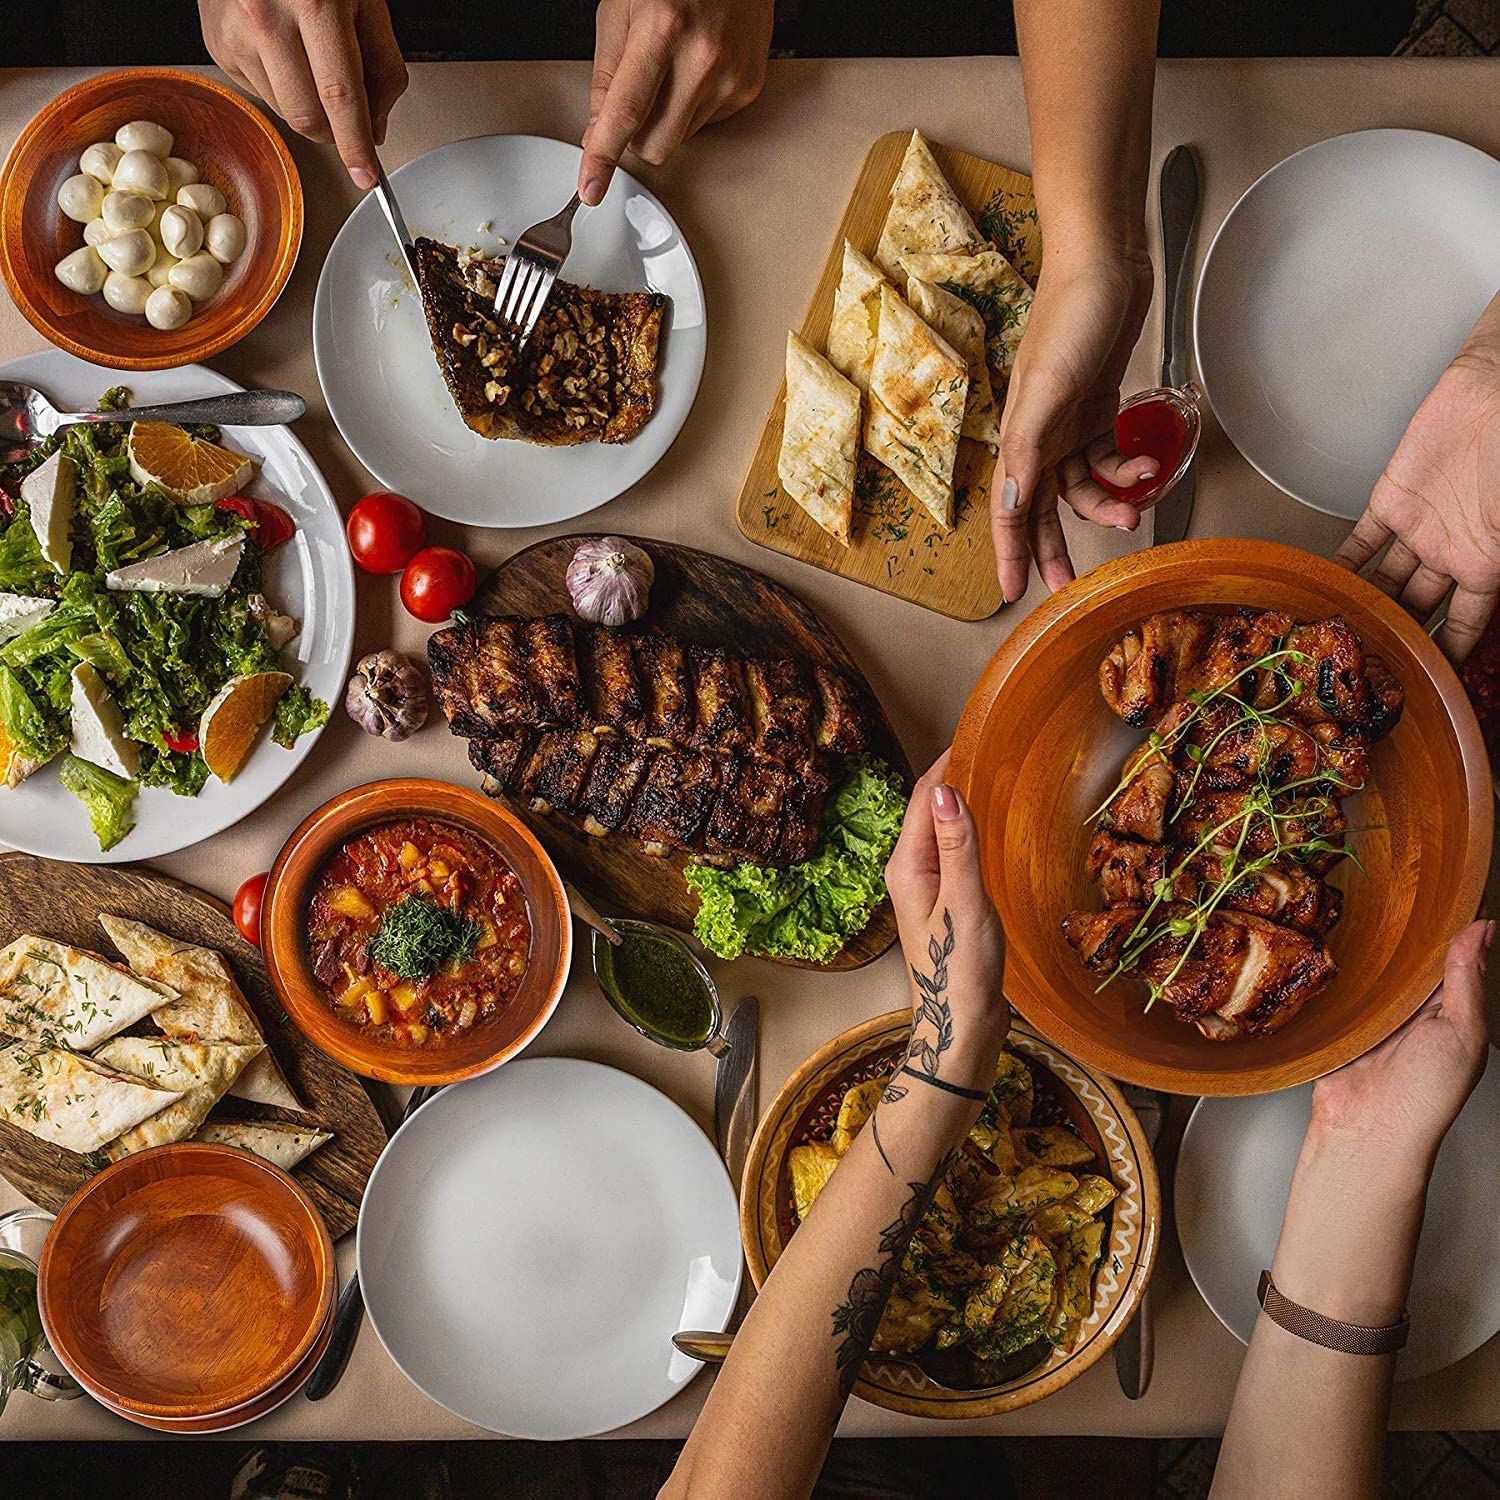 flatlay of table full of food with peoples hands reaching in